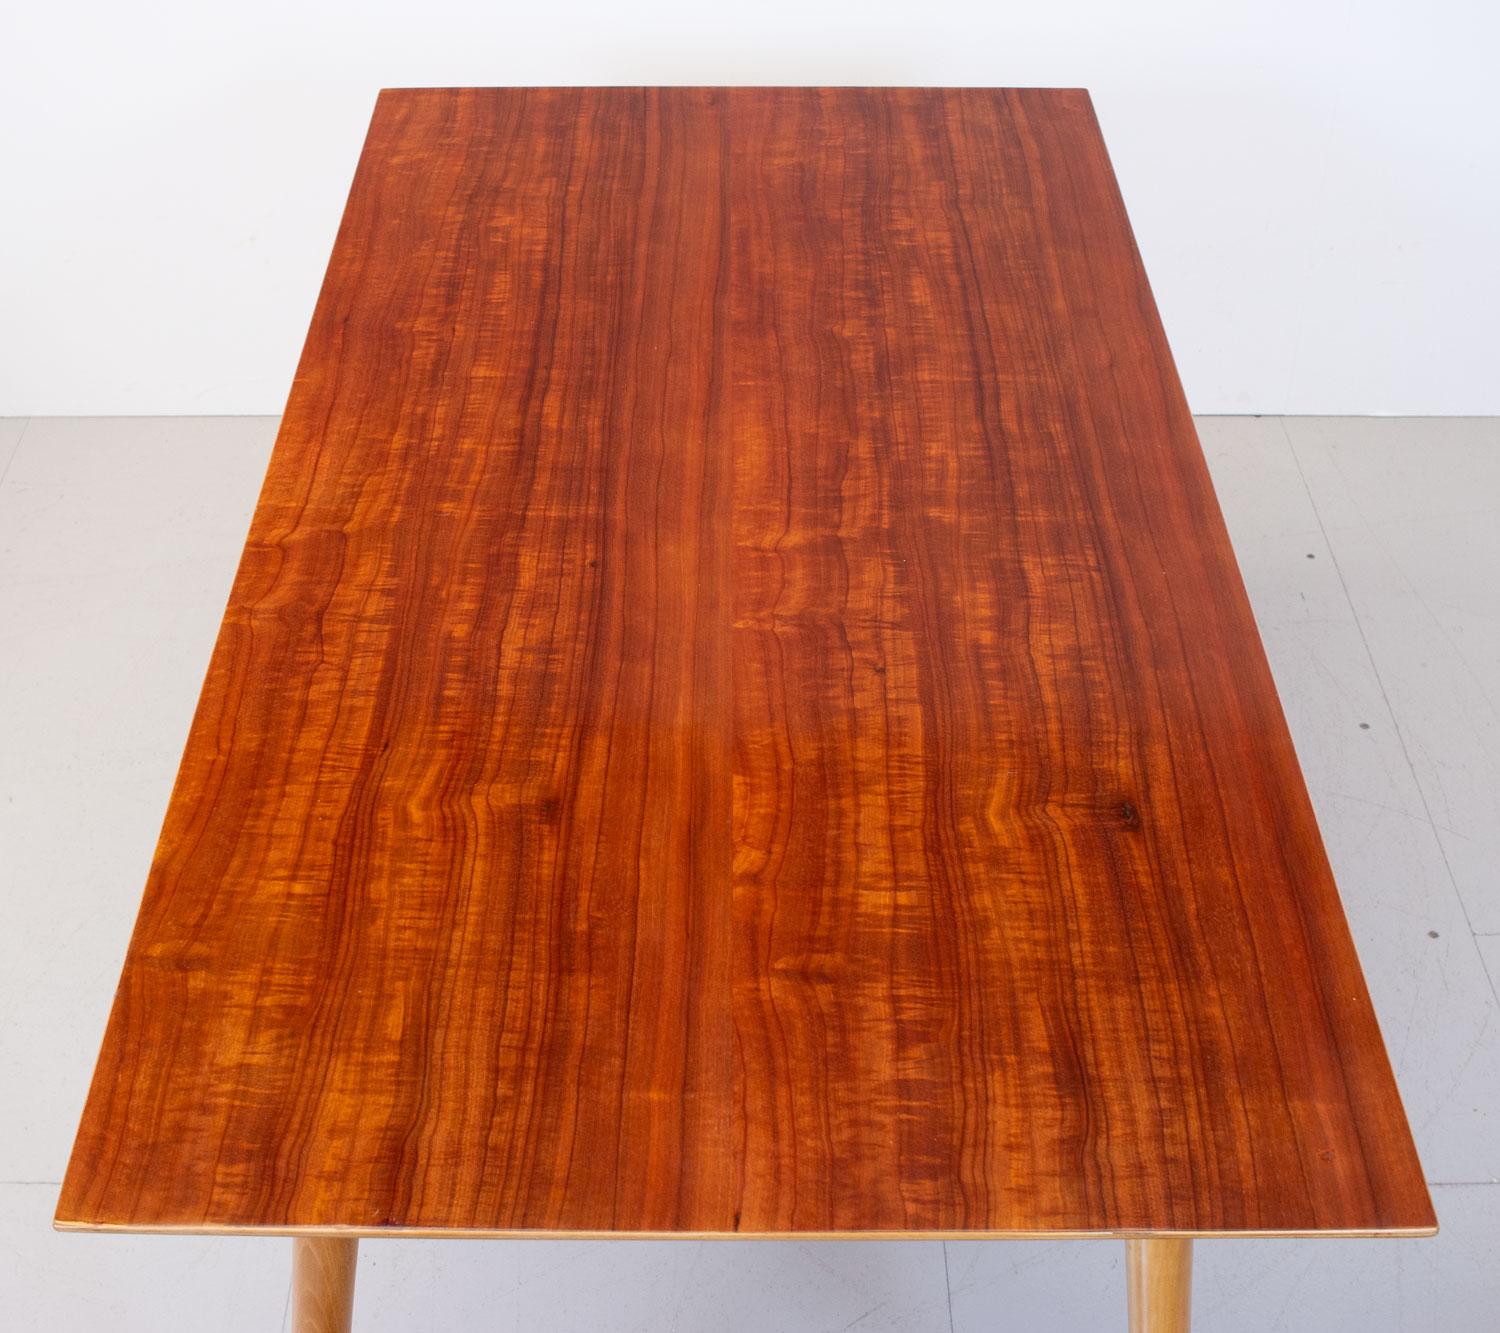 Beautiful dining table designed by iconic British designer Robin Day for Hille in 1952. This minimalist design has a beech frame and turned legs with a plywood top veneered in a vibrant Nigerian cherry wood.